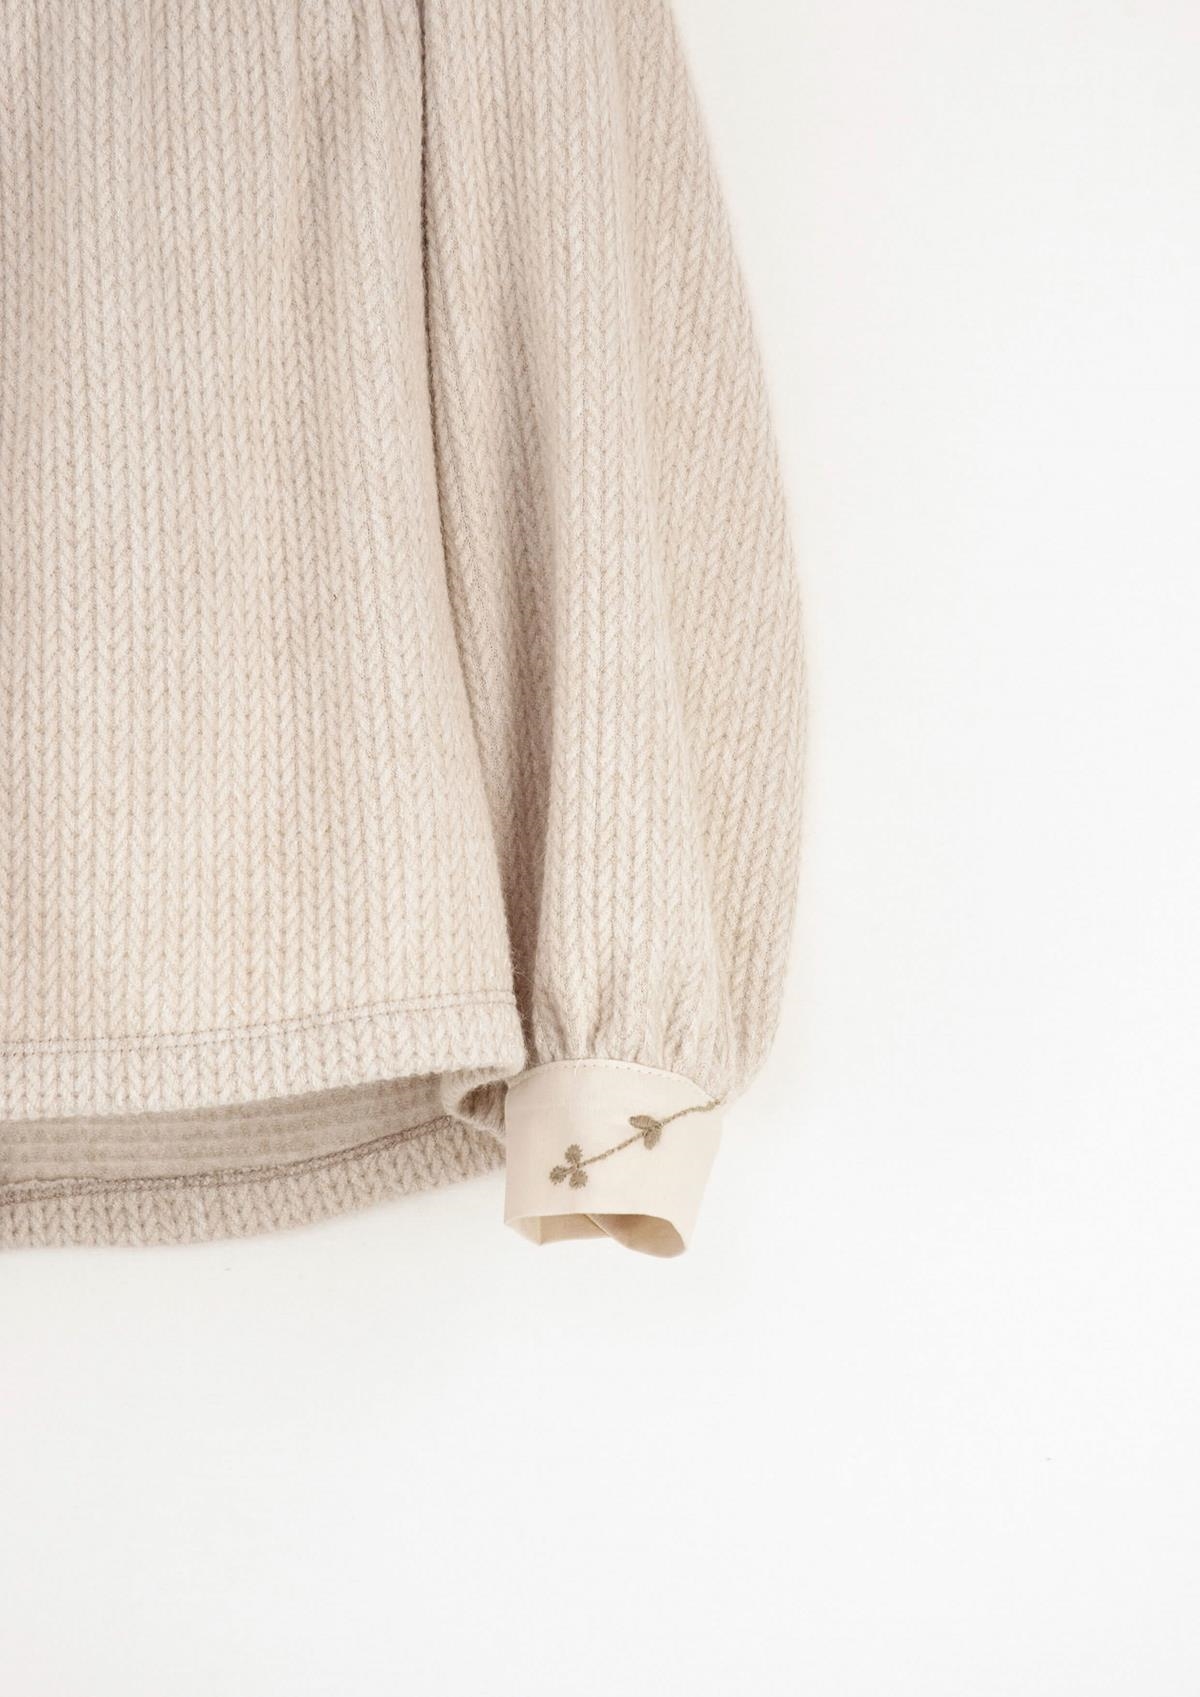 Mod.13.3 Knitted blouse with baby collar | AW23.24 Mod.13.3 Knitted blouse with baby collar